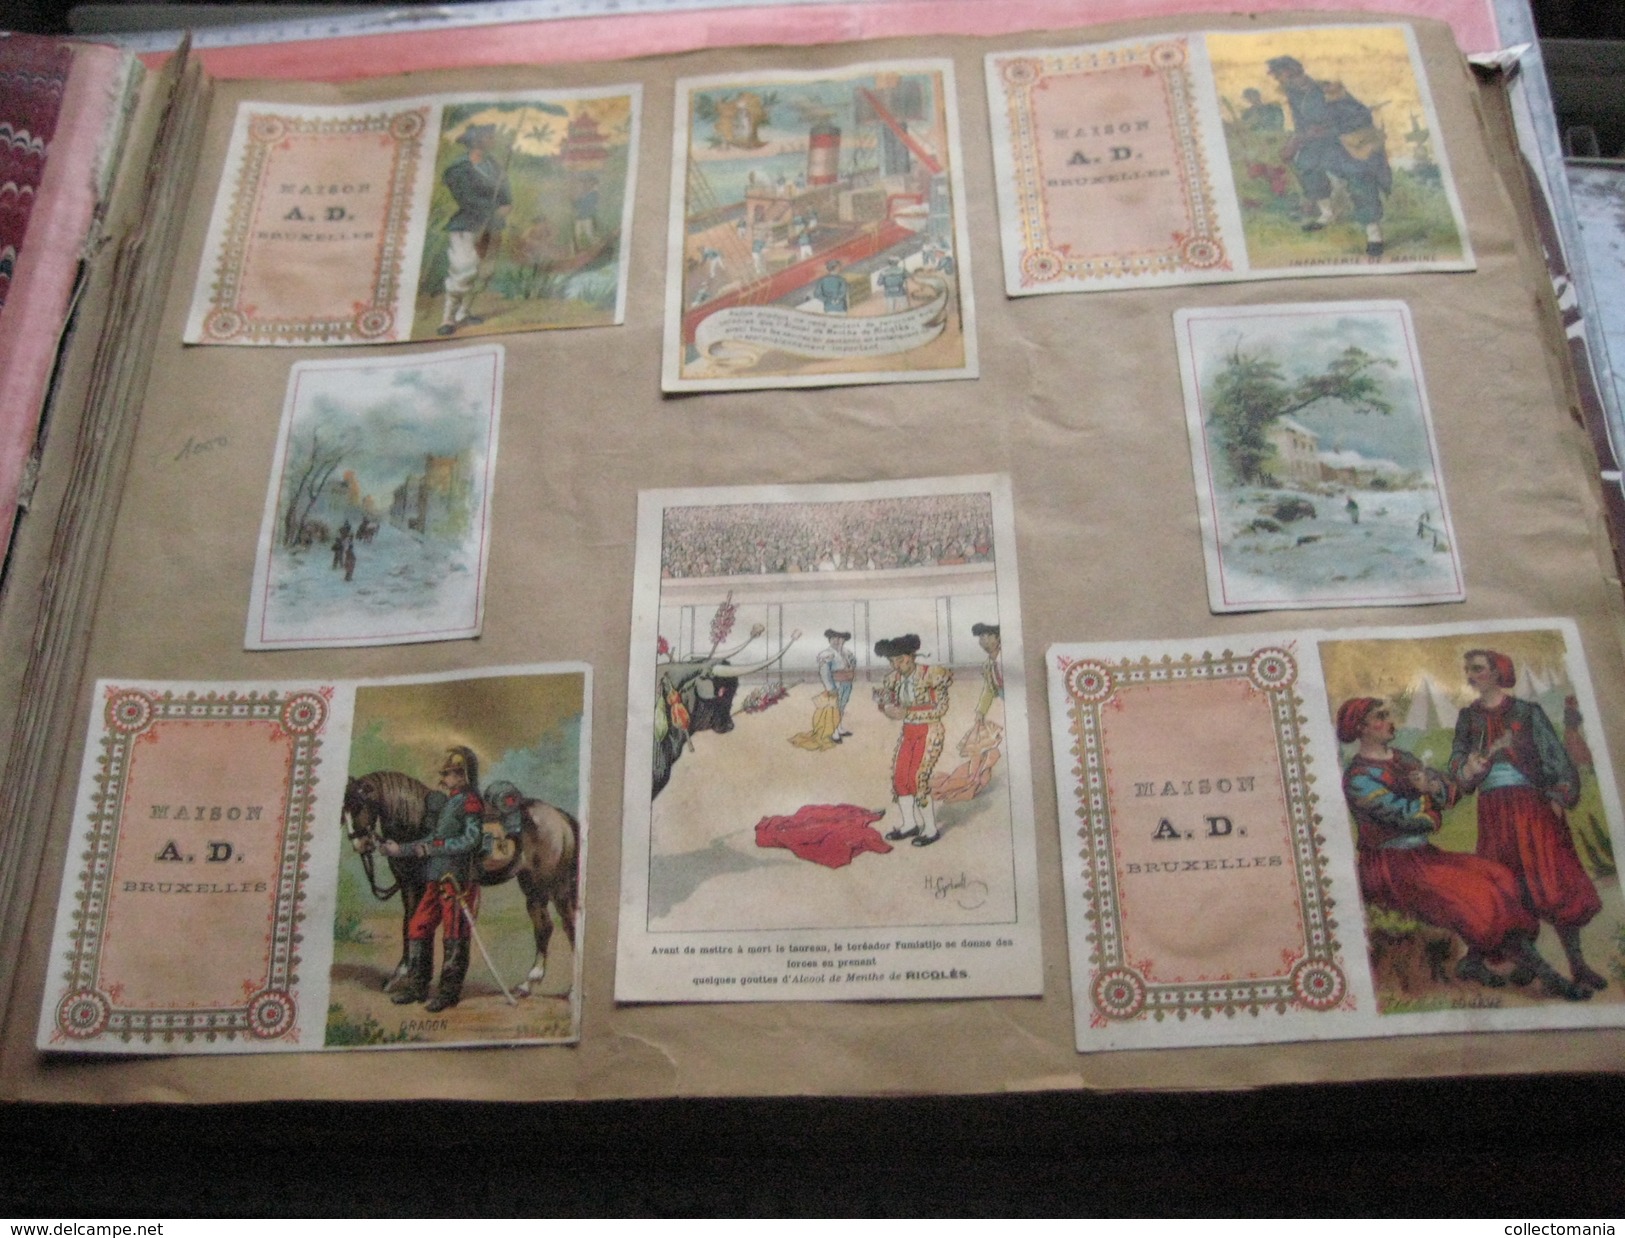 EAlbum Around 1890, 100rds Litho Advertising Cards, Some Compl. Sets, Hundreds Of Trade Cards : Hunley & Palmer, Suchard - Suchard